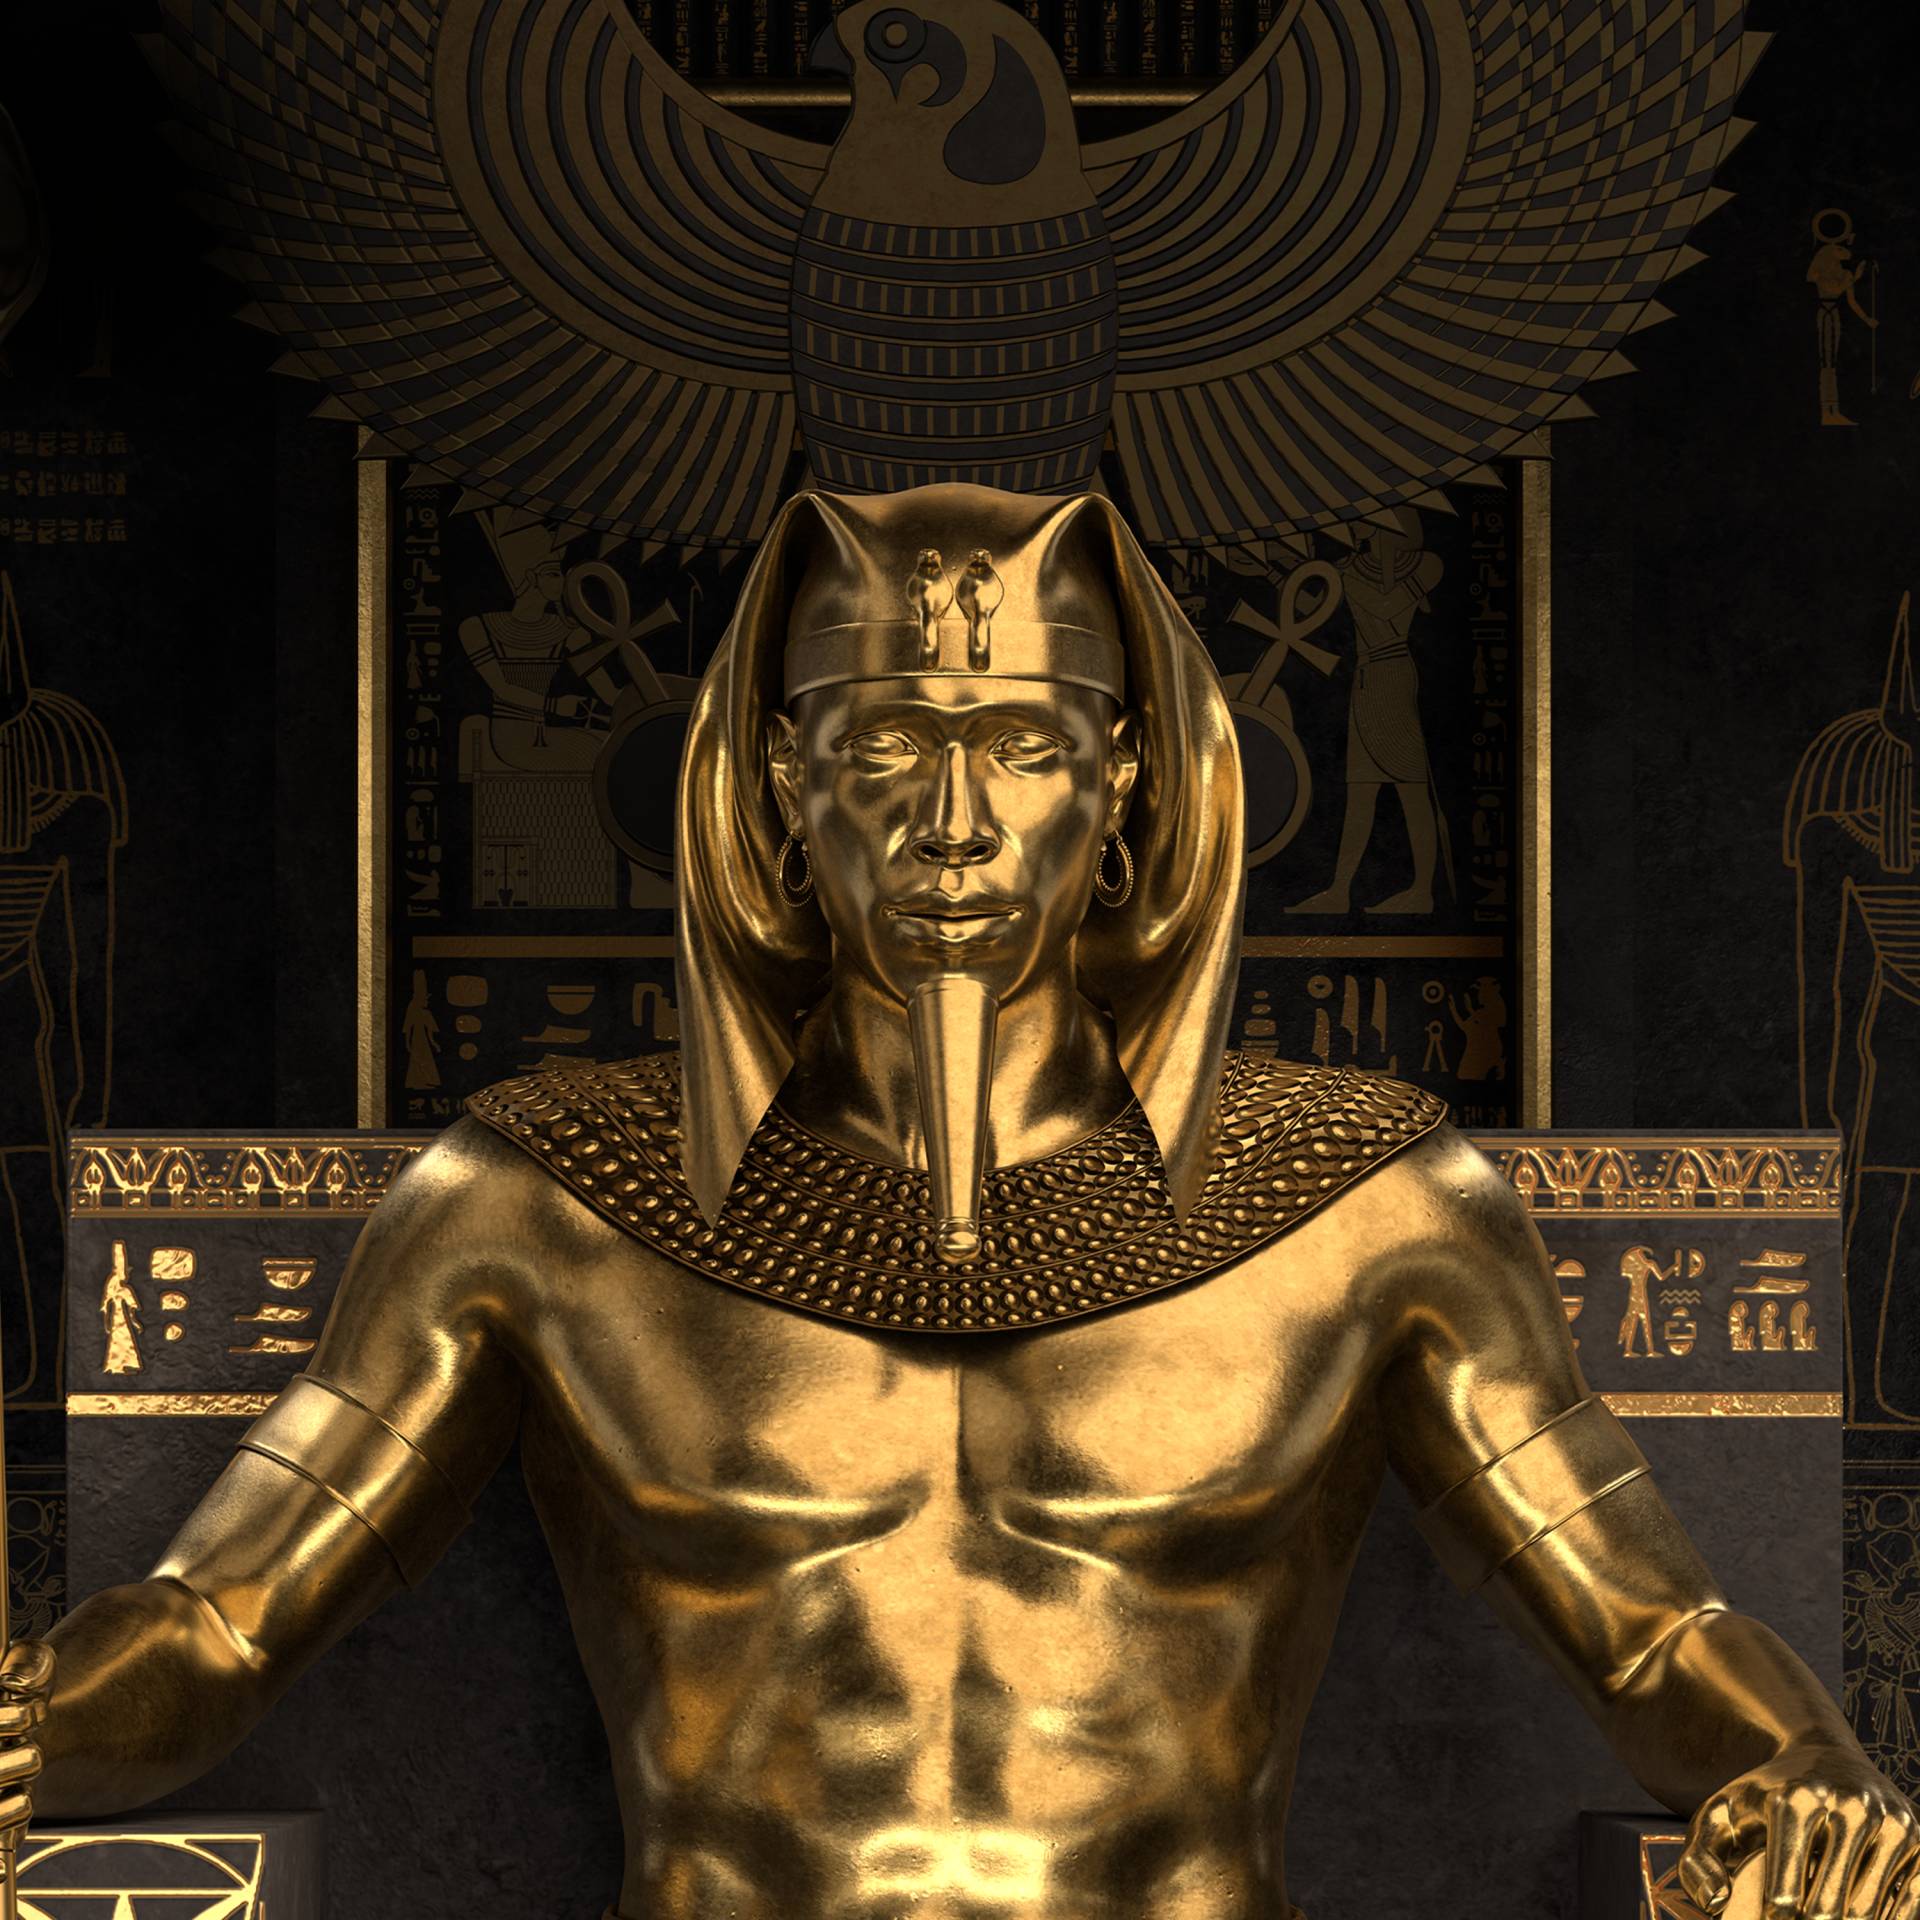 Stream Lost Kingdom of the Black Pharaohs | discovery+